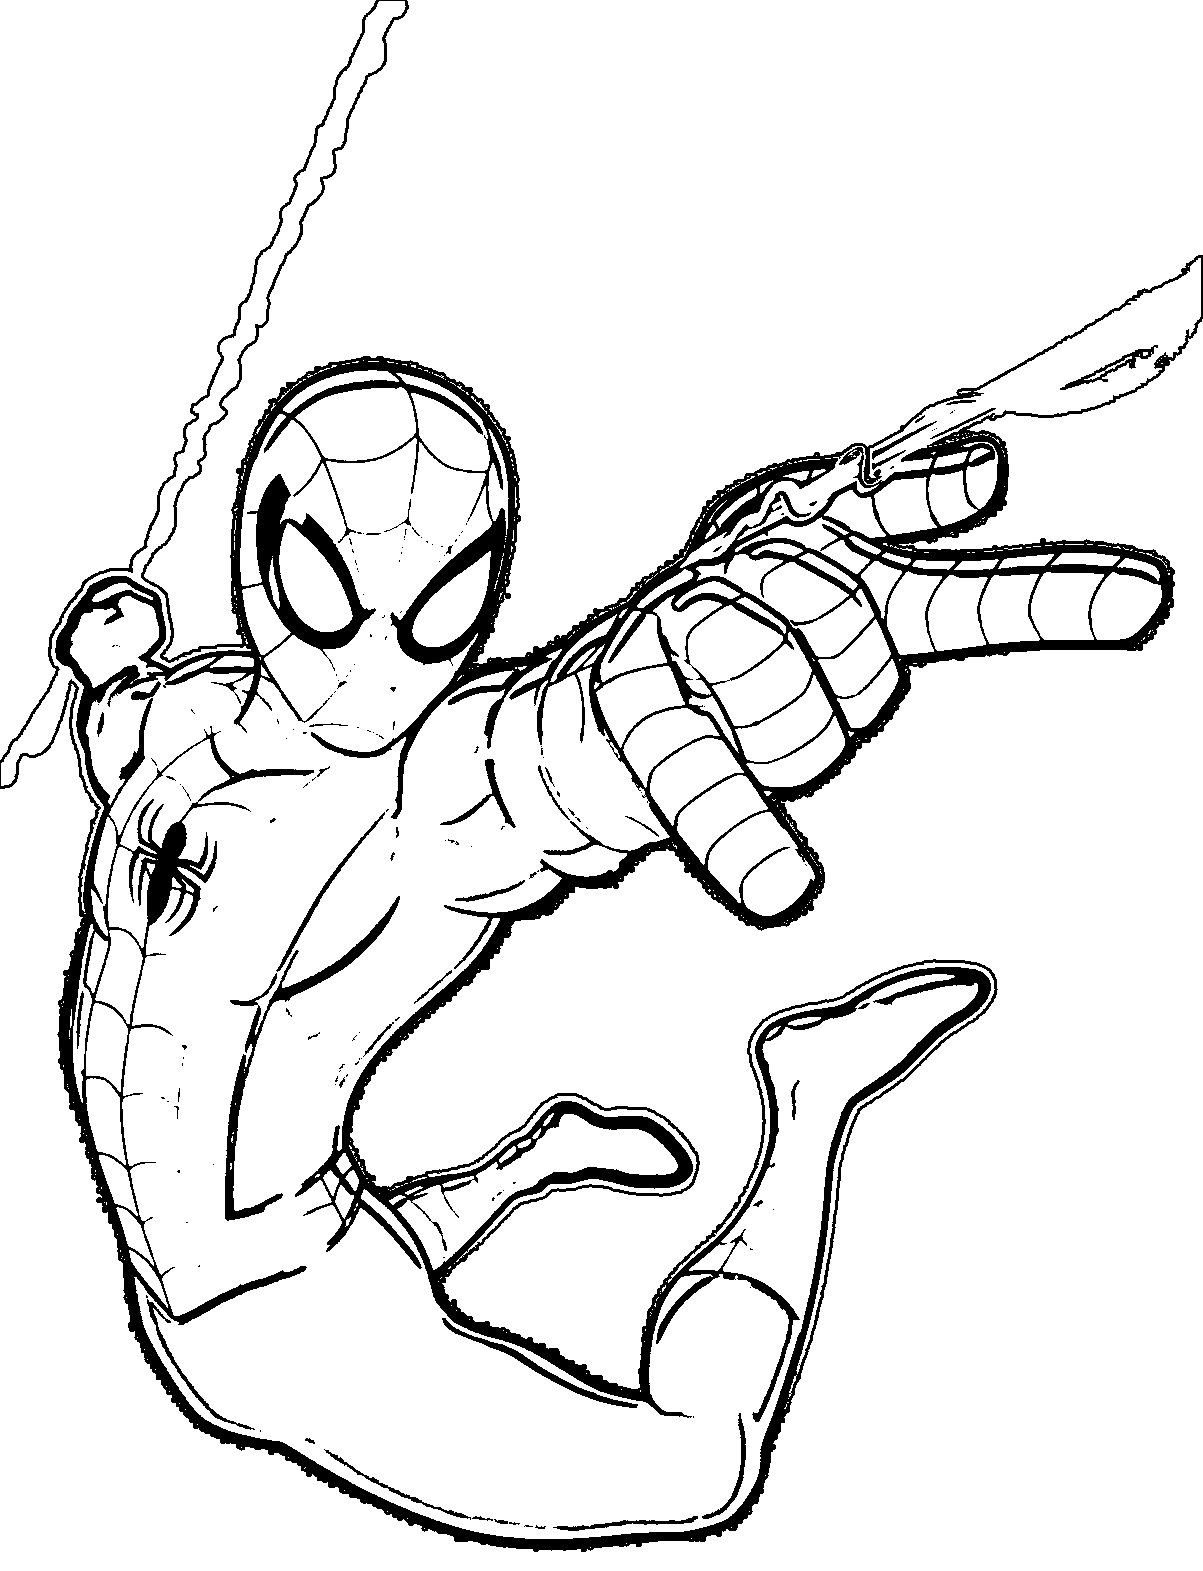 Easy Spiderman Coloring Pages Printable - Printable World Holiday